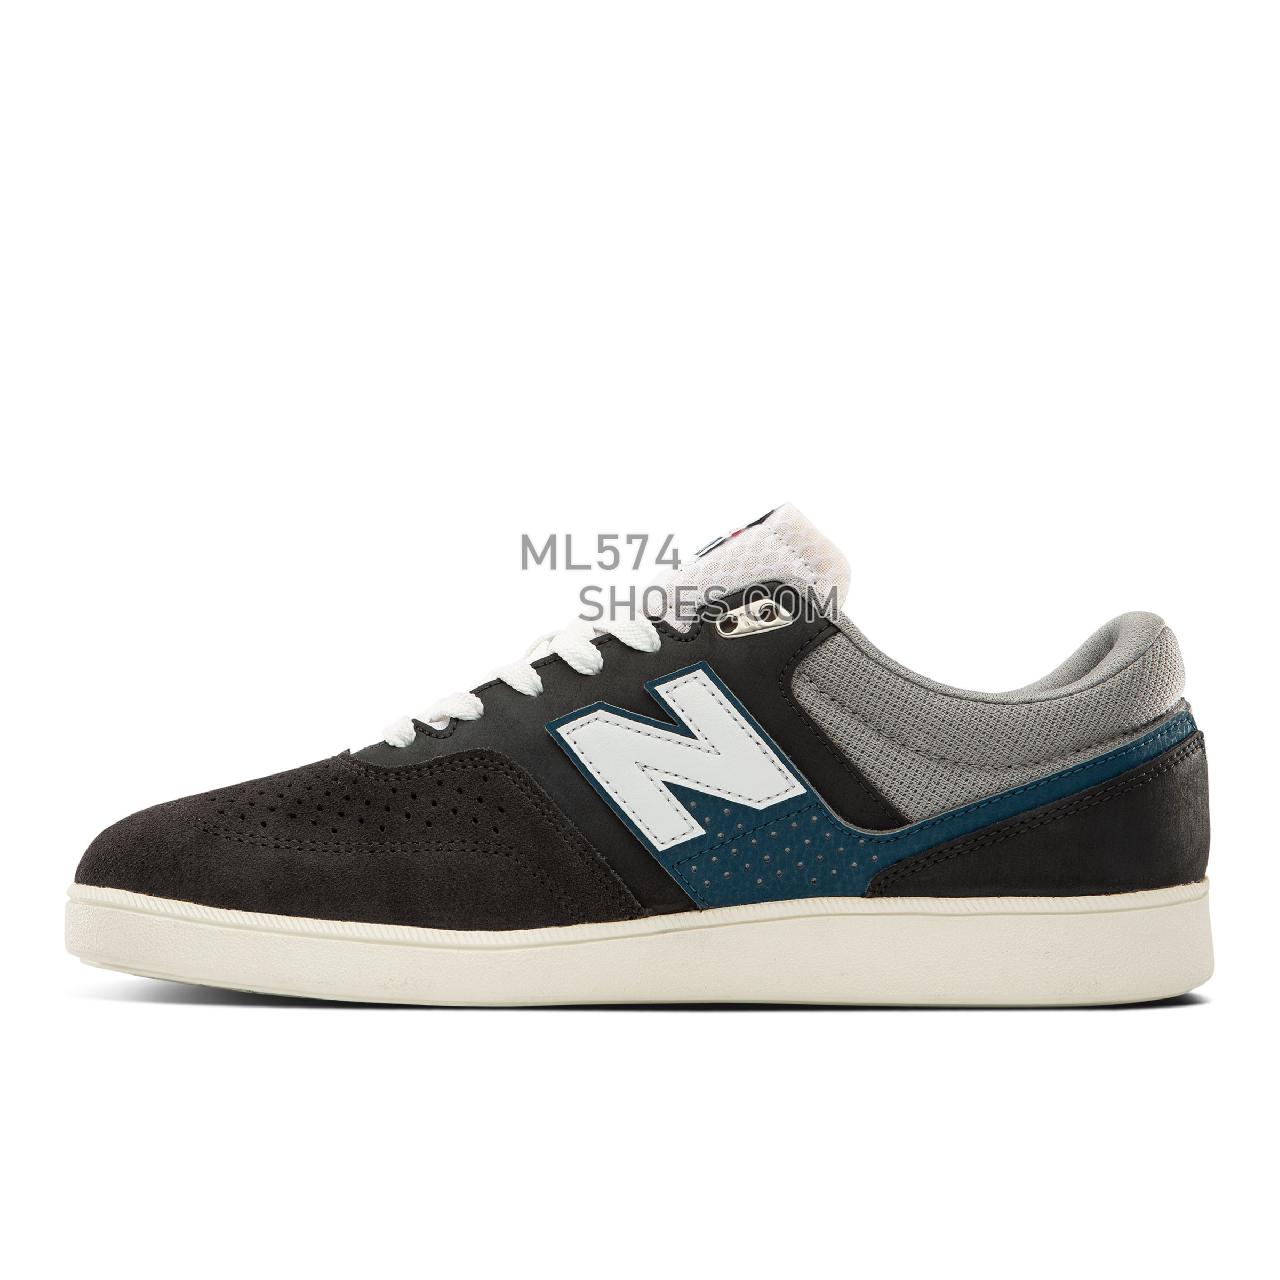 New Balance Numeric NM508 - Men's Classic Sneakers - Dark Grey with Blue - NM508GRB